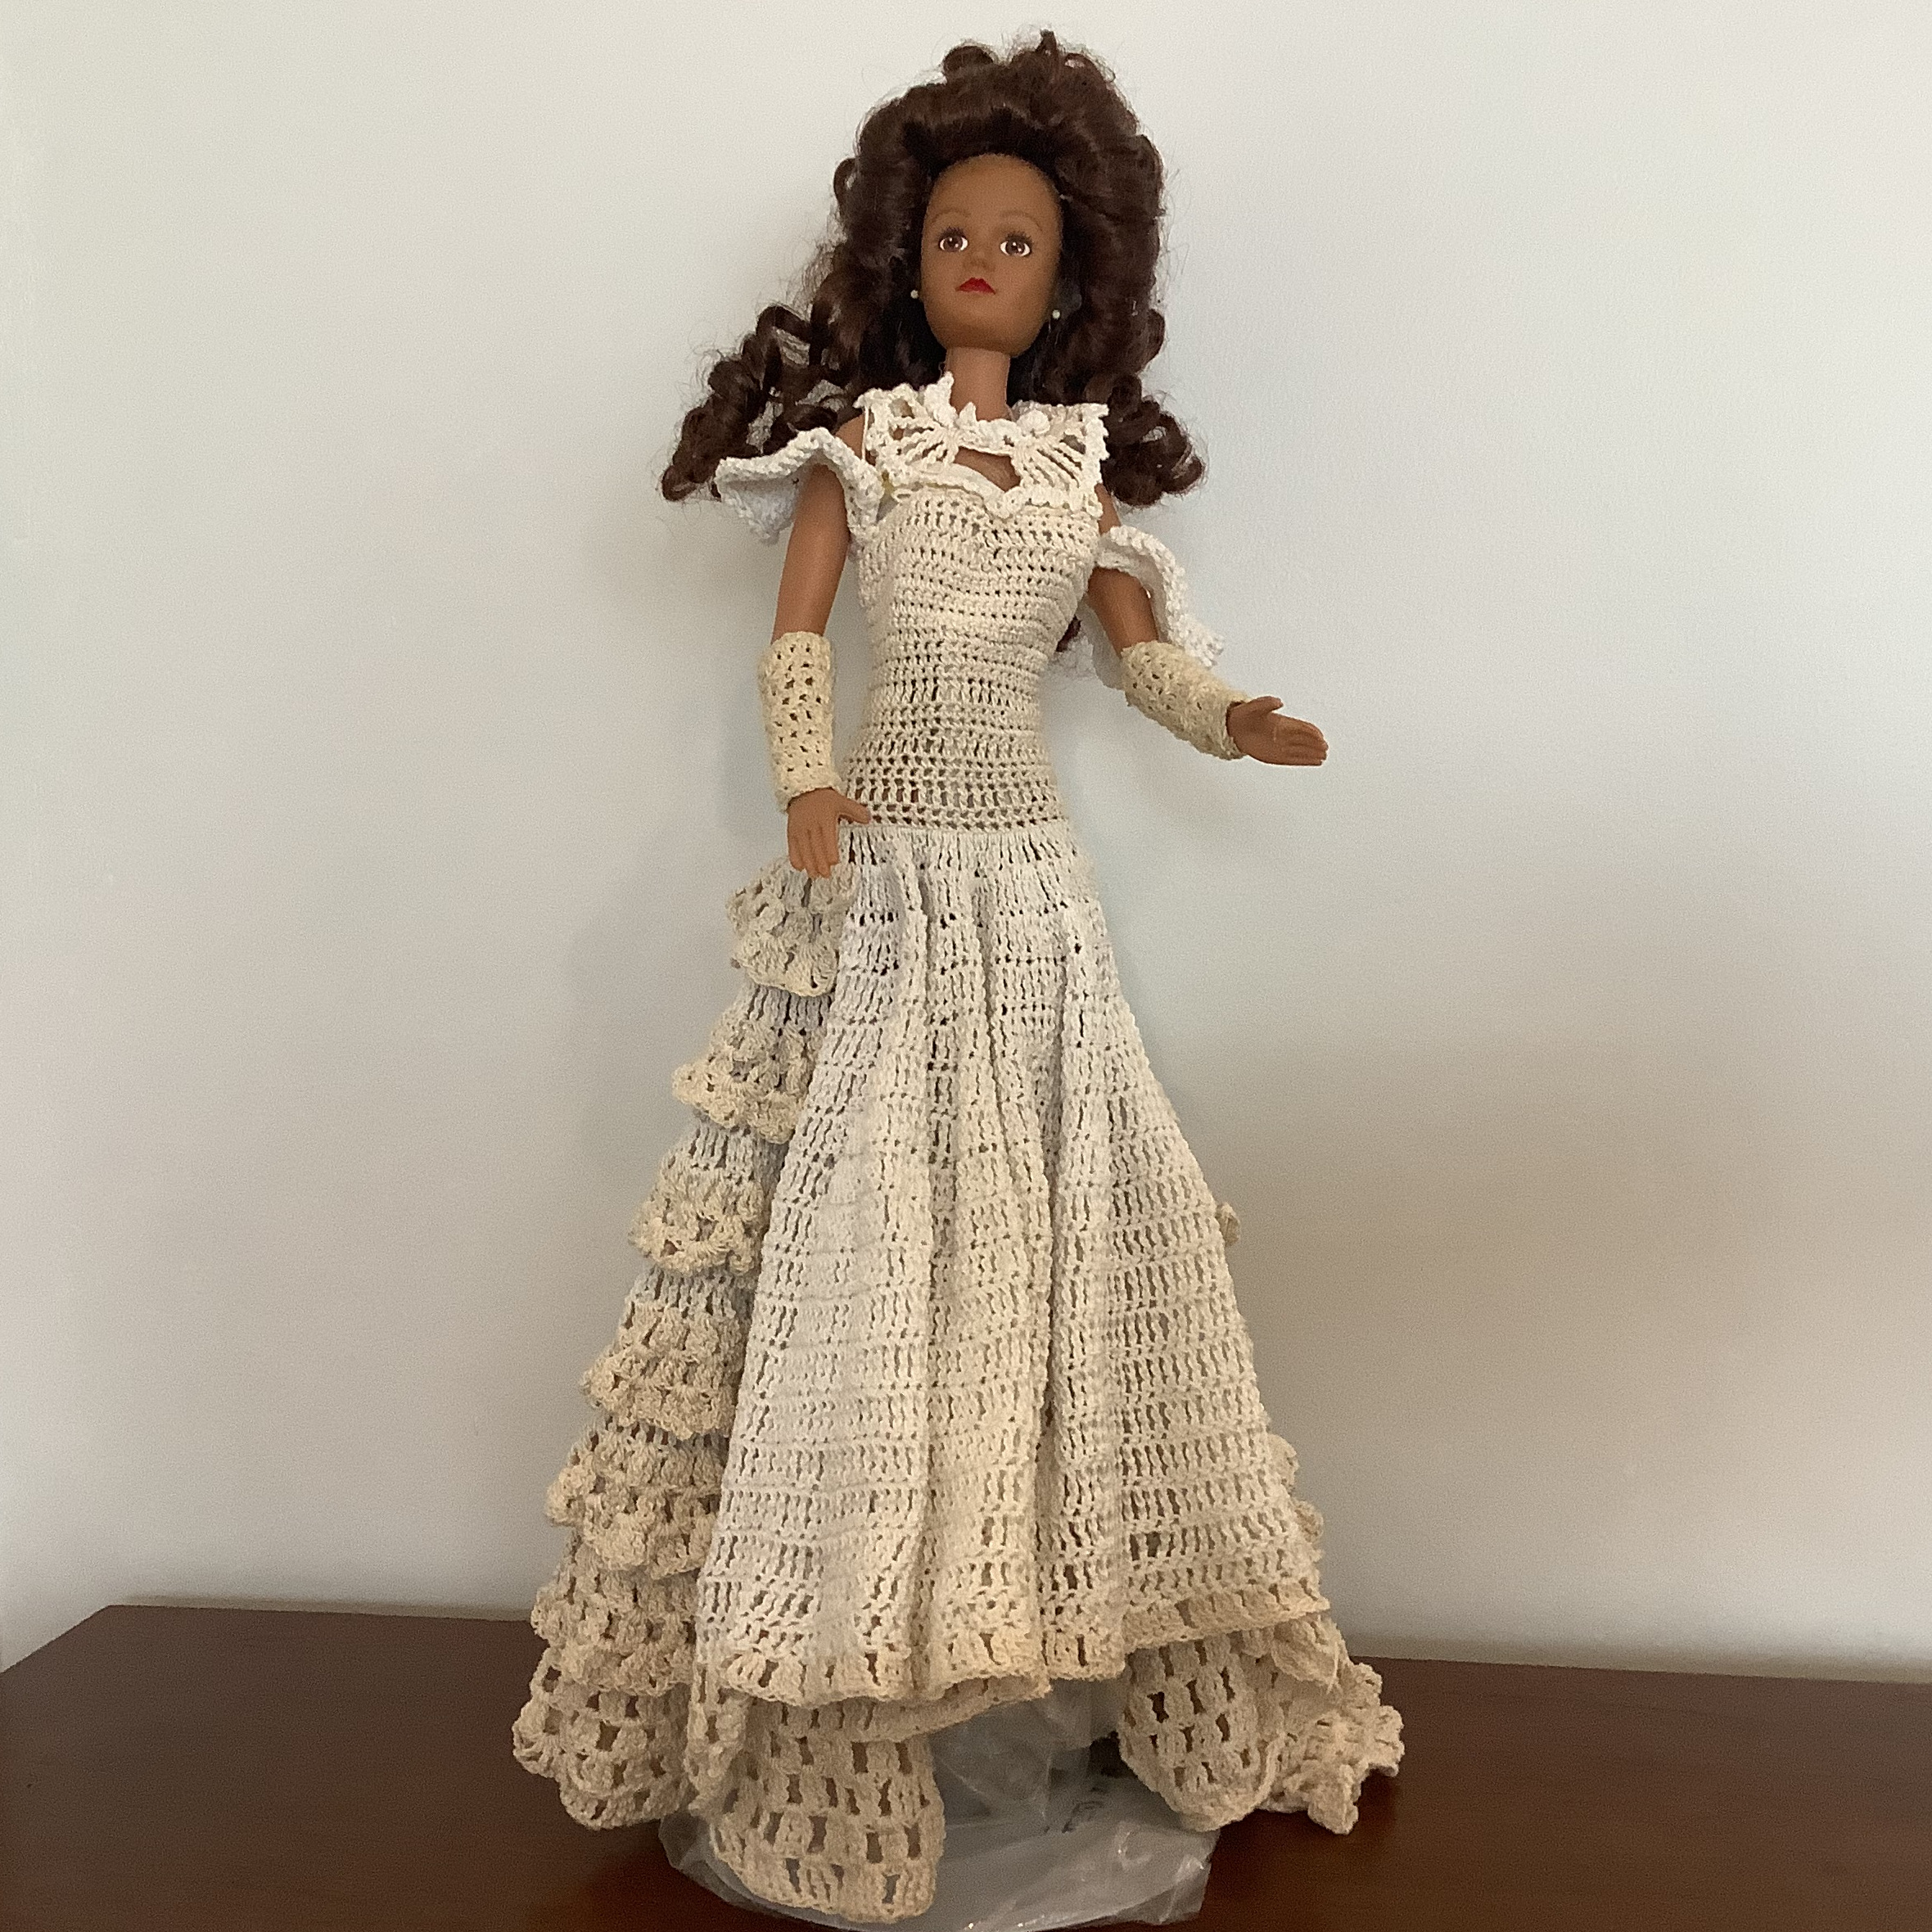 Tall, brown-skinned modern fashion doll in off-white crocheted dress